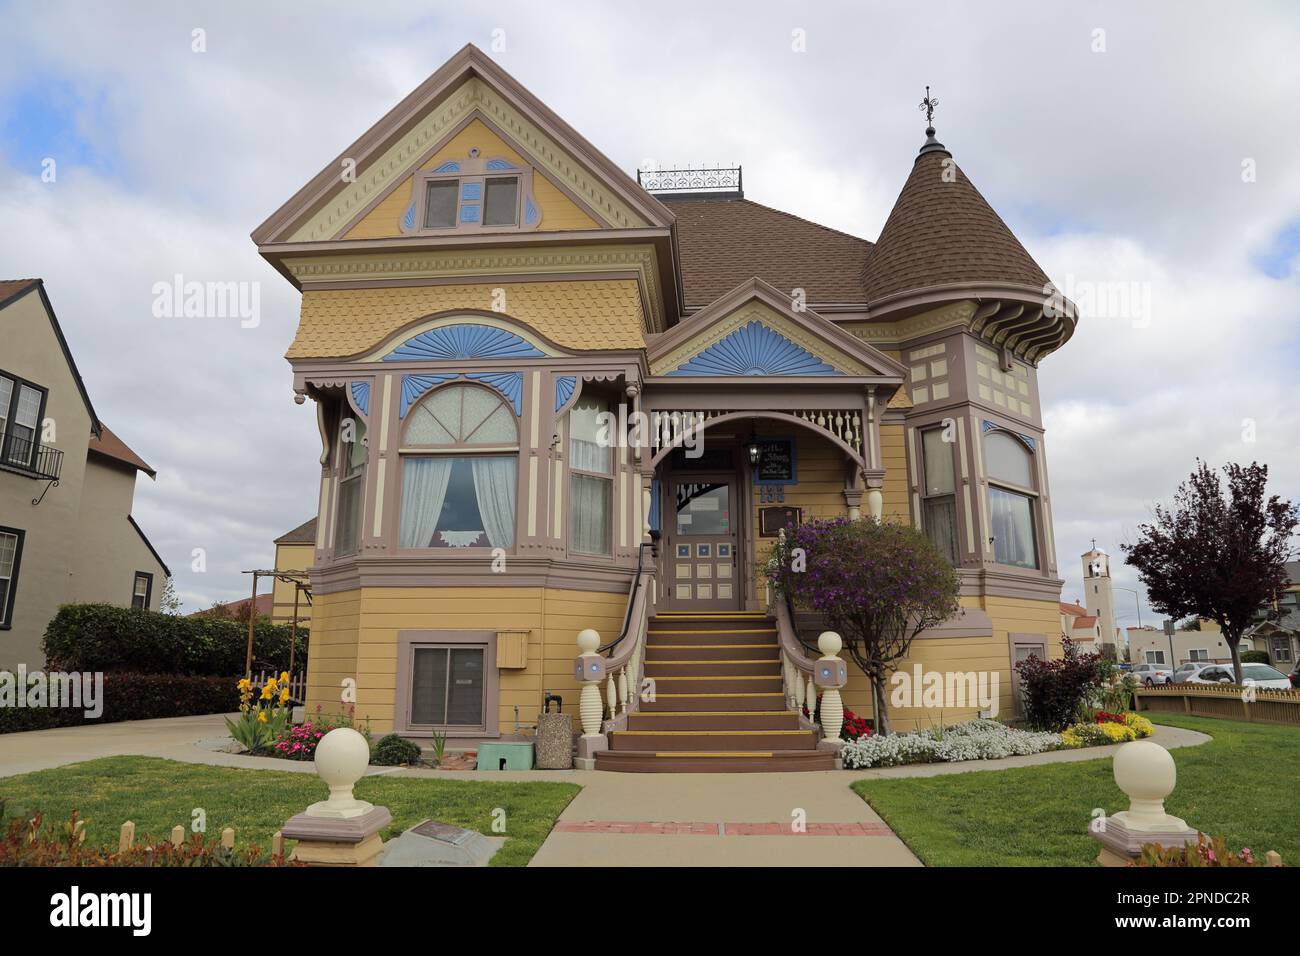 Salinas, California / USA - April 5, 2021: The birthplace and boyhood home of writer John Steinbeck is shown from an exterior, front view. Stock Photo